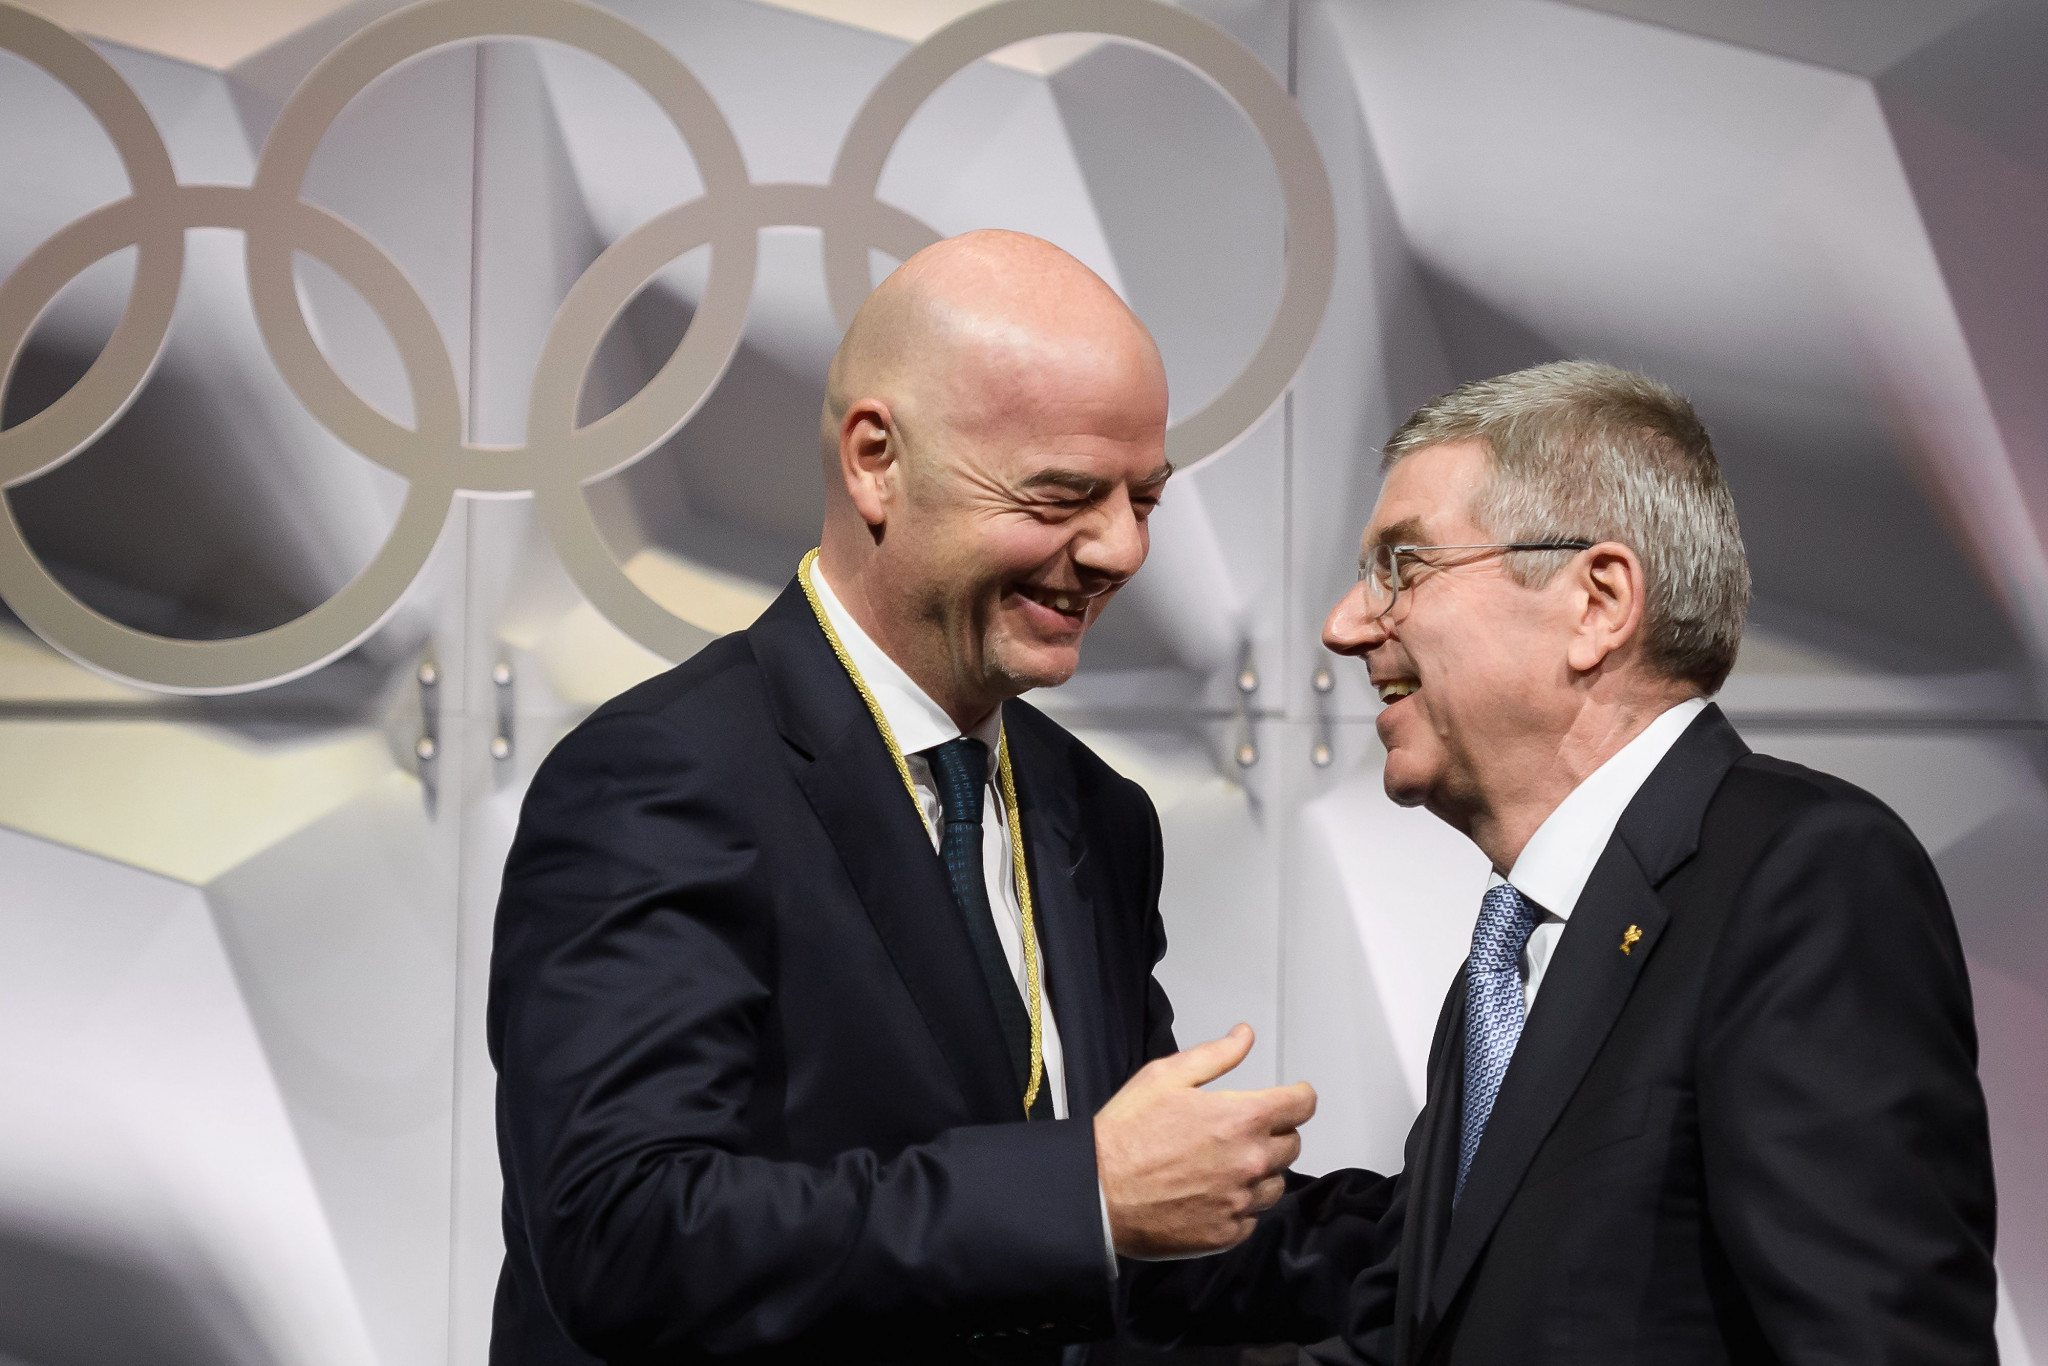 FIFA President Gianni Infantino was welcomed as an IOC member ©Getty Images